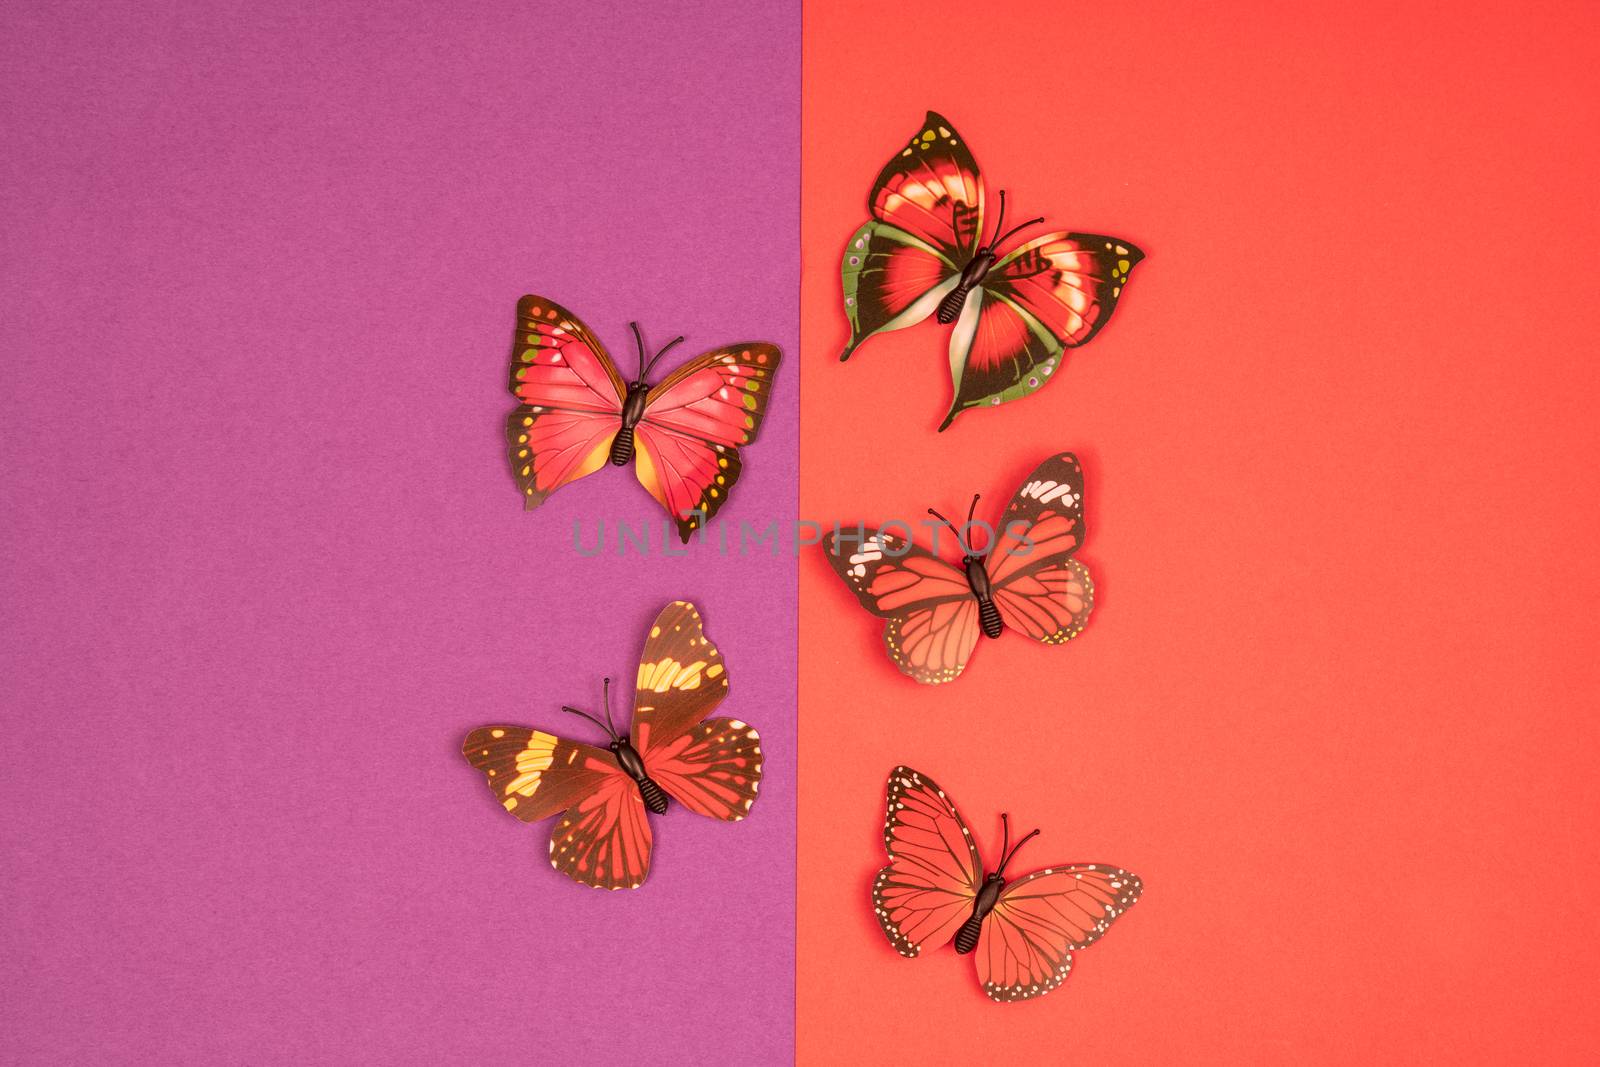 decorative butterflies on a colored background